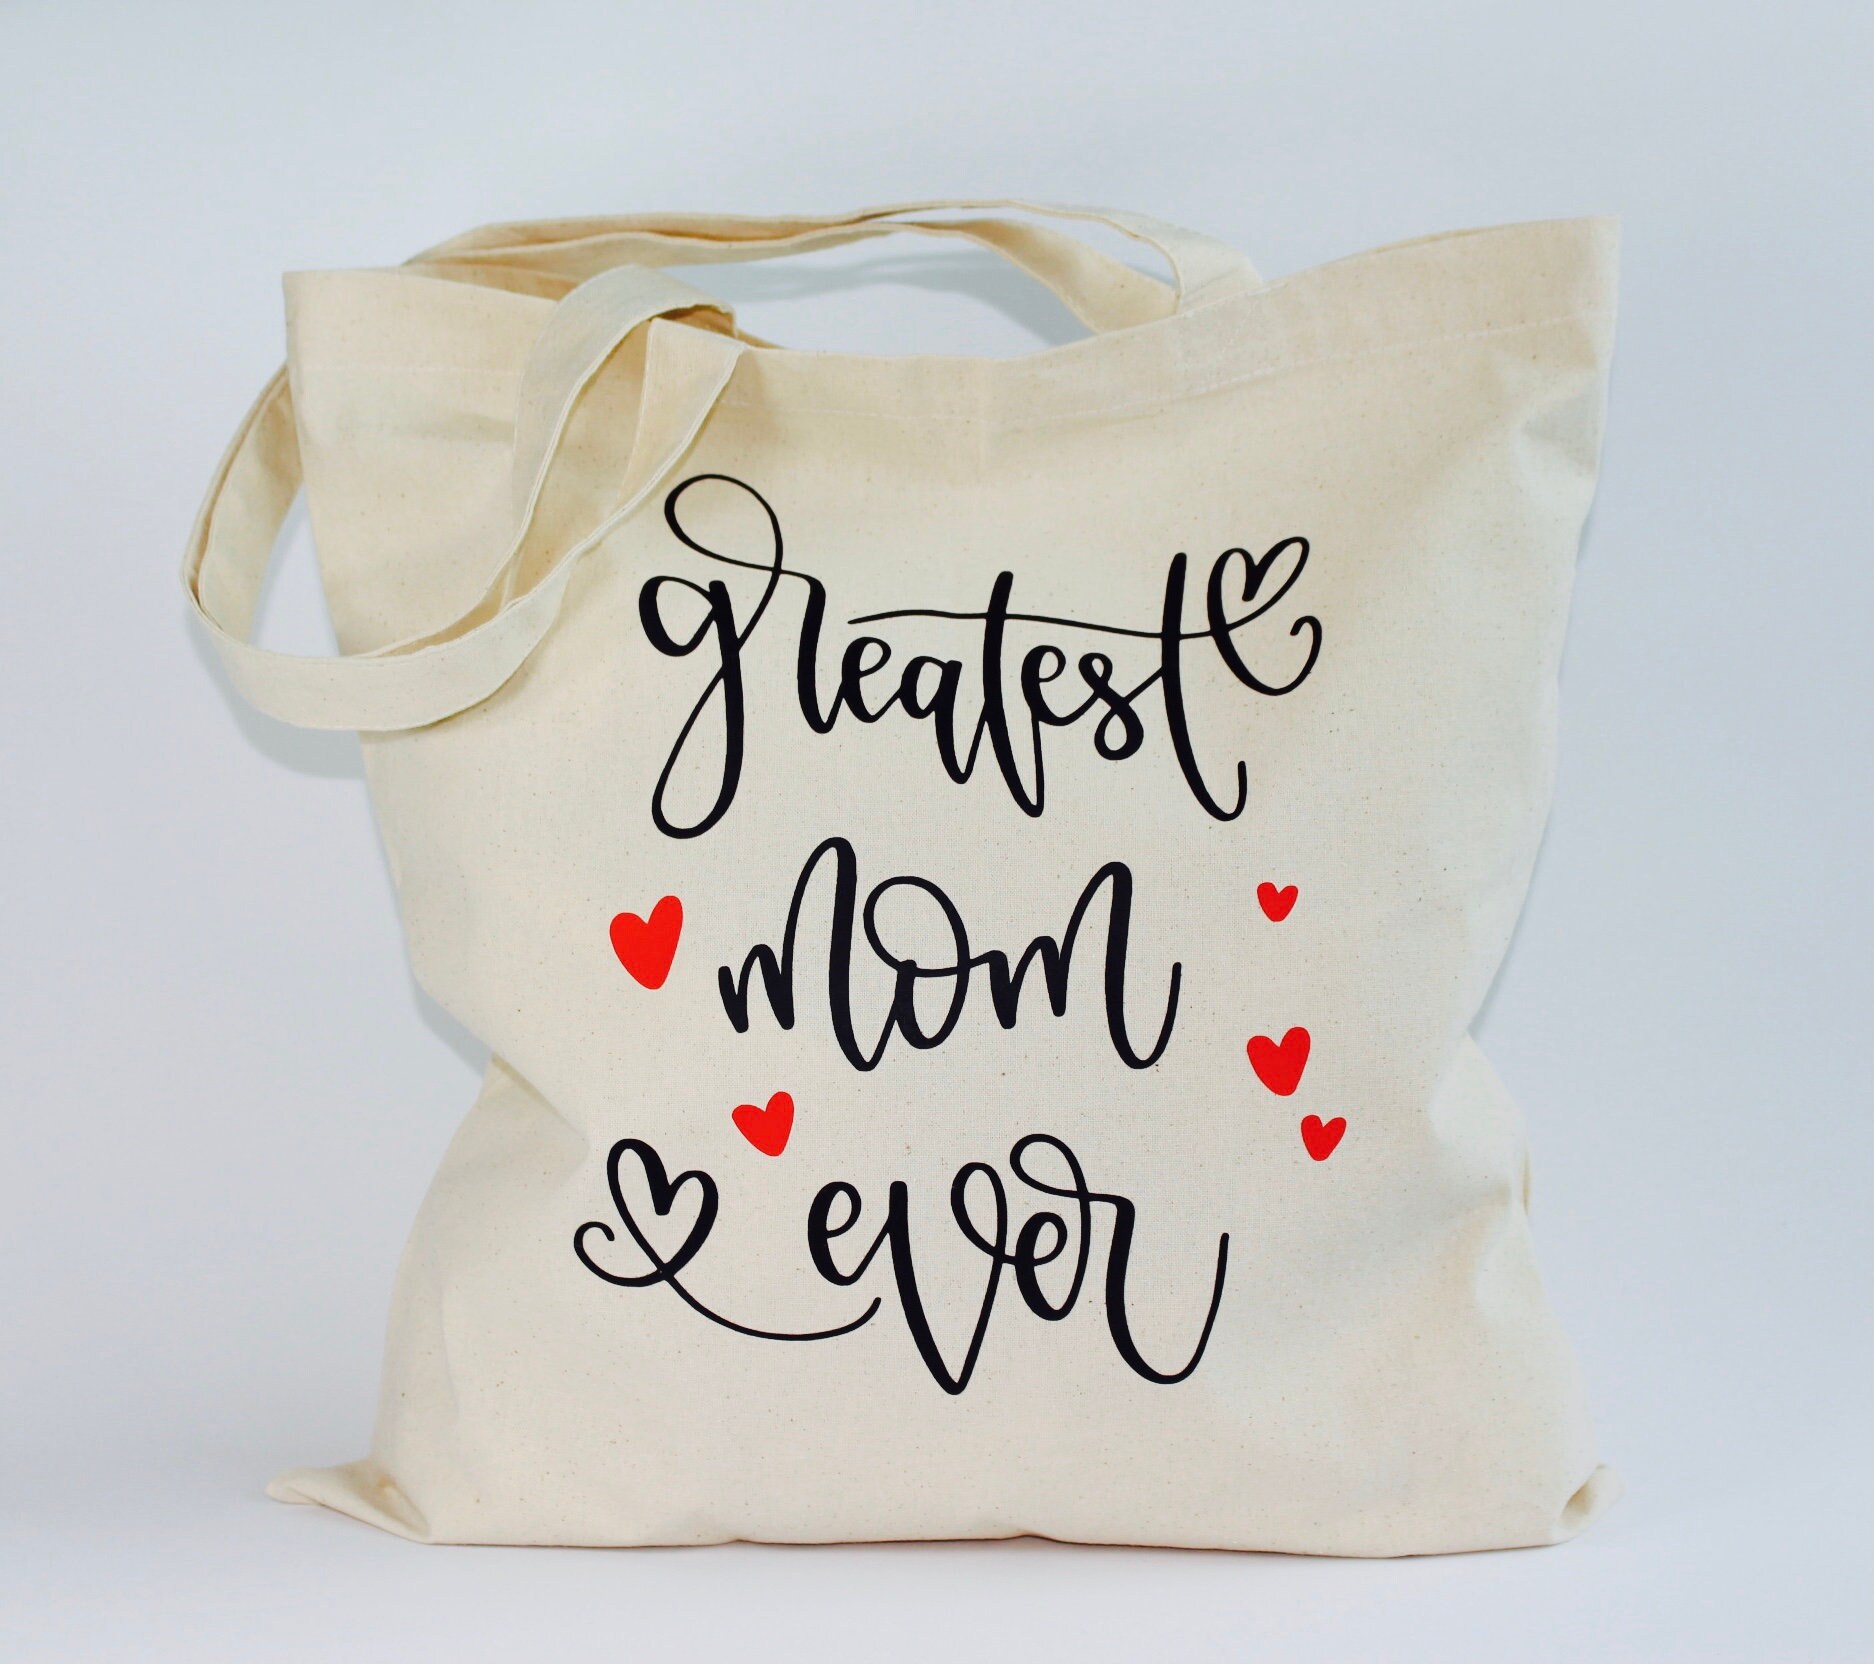 Buy Tote Mothers Day Bags Online in India with Custom Photo Printing   PrintLand